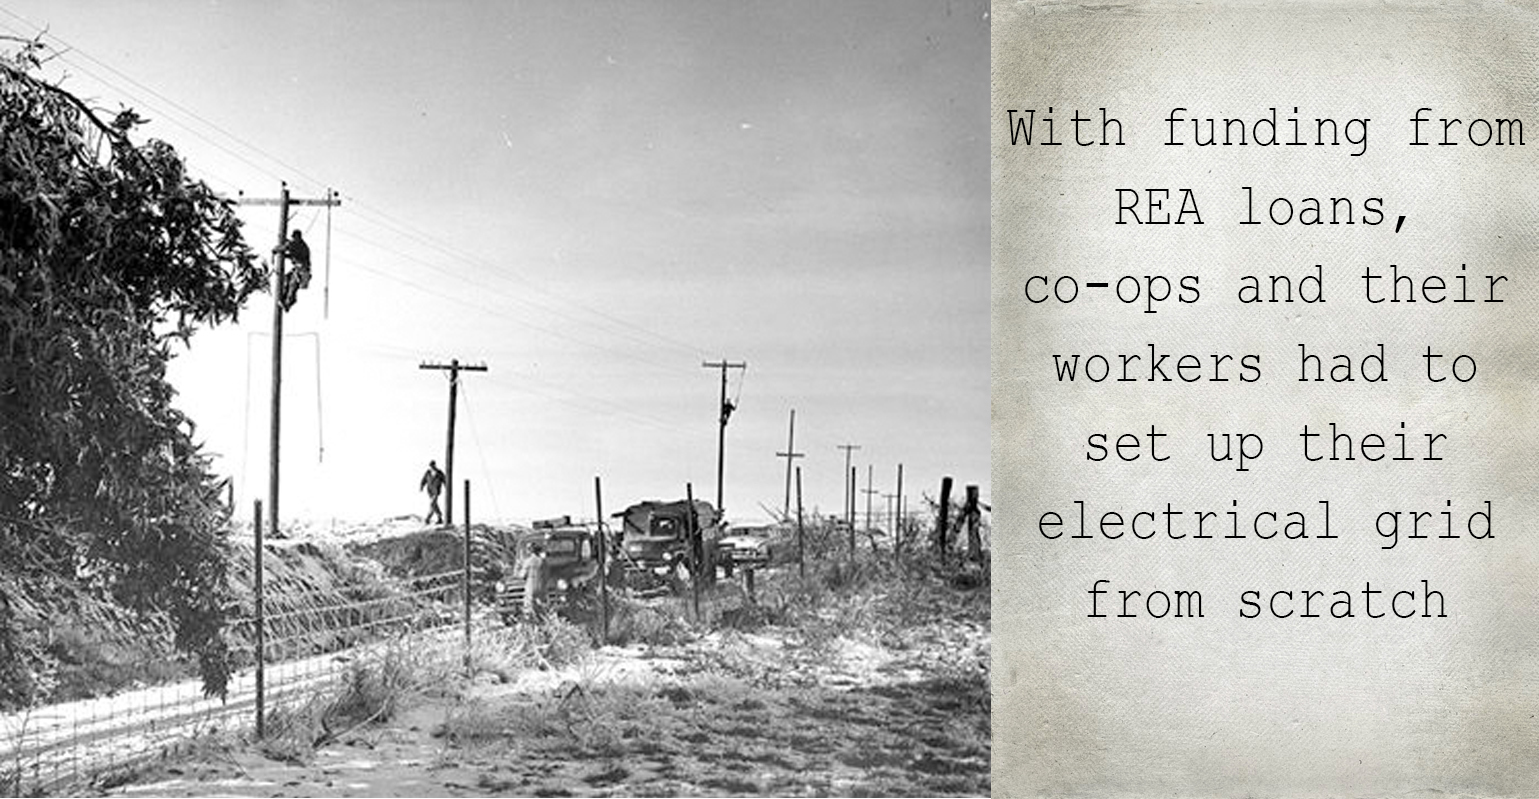 With funding from REA loans, co-ops and their workers had to set up their electrical grid from scratch